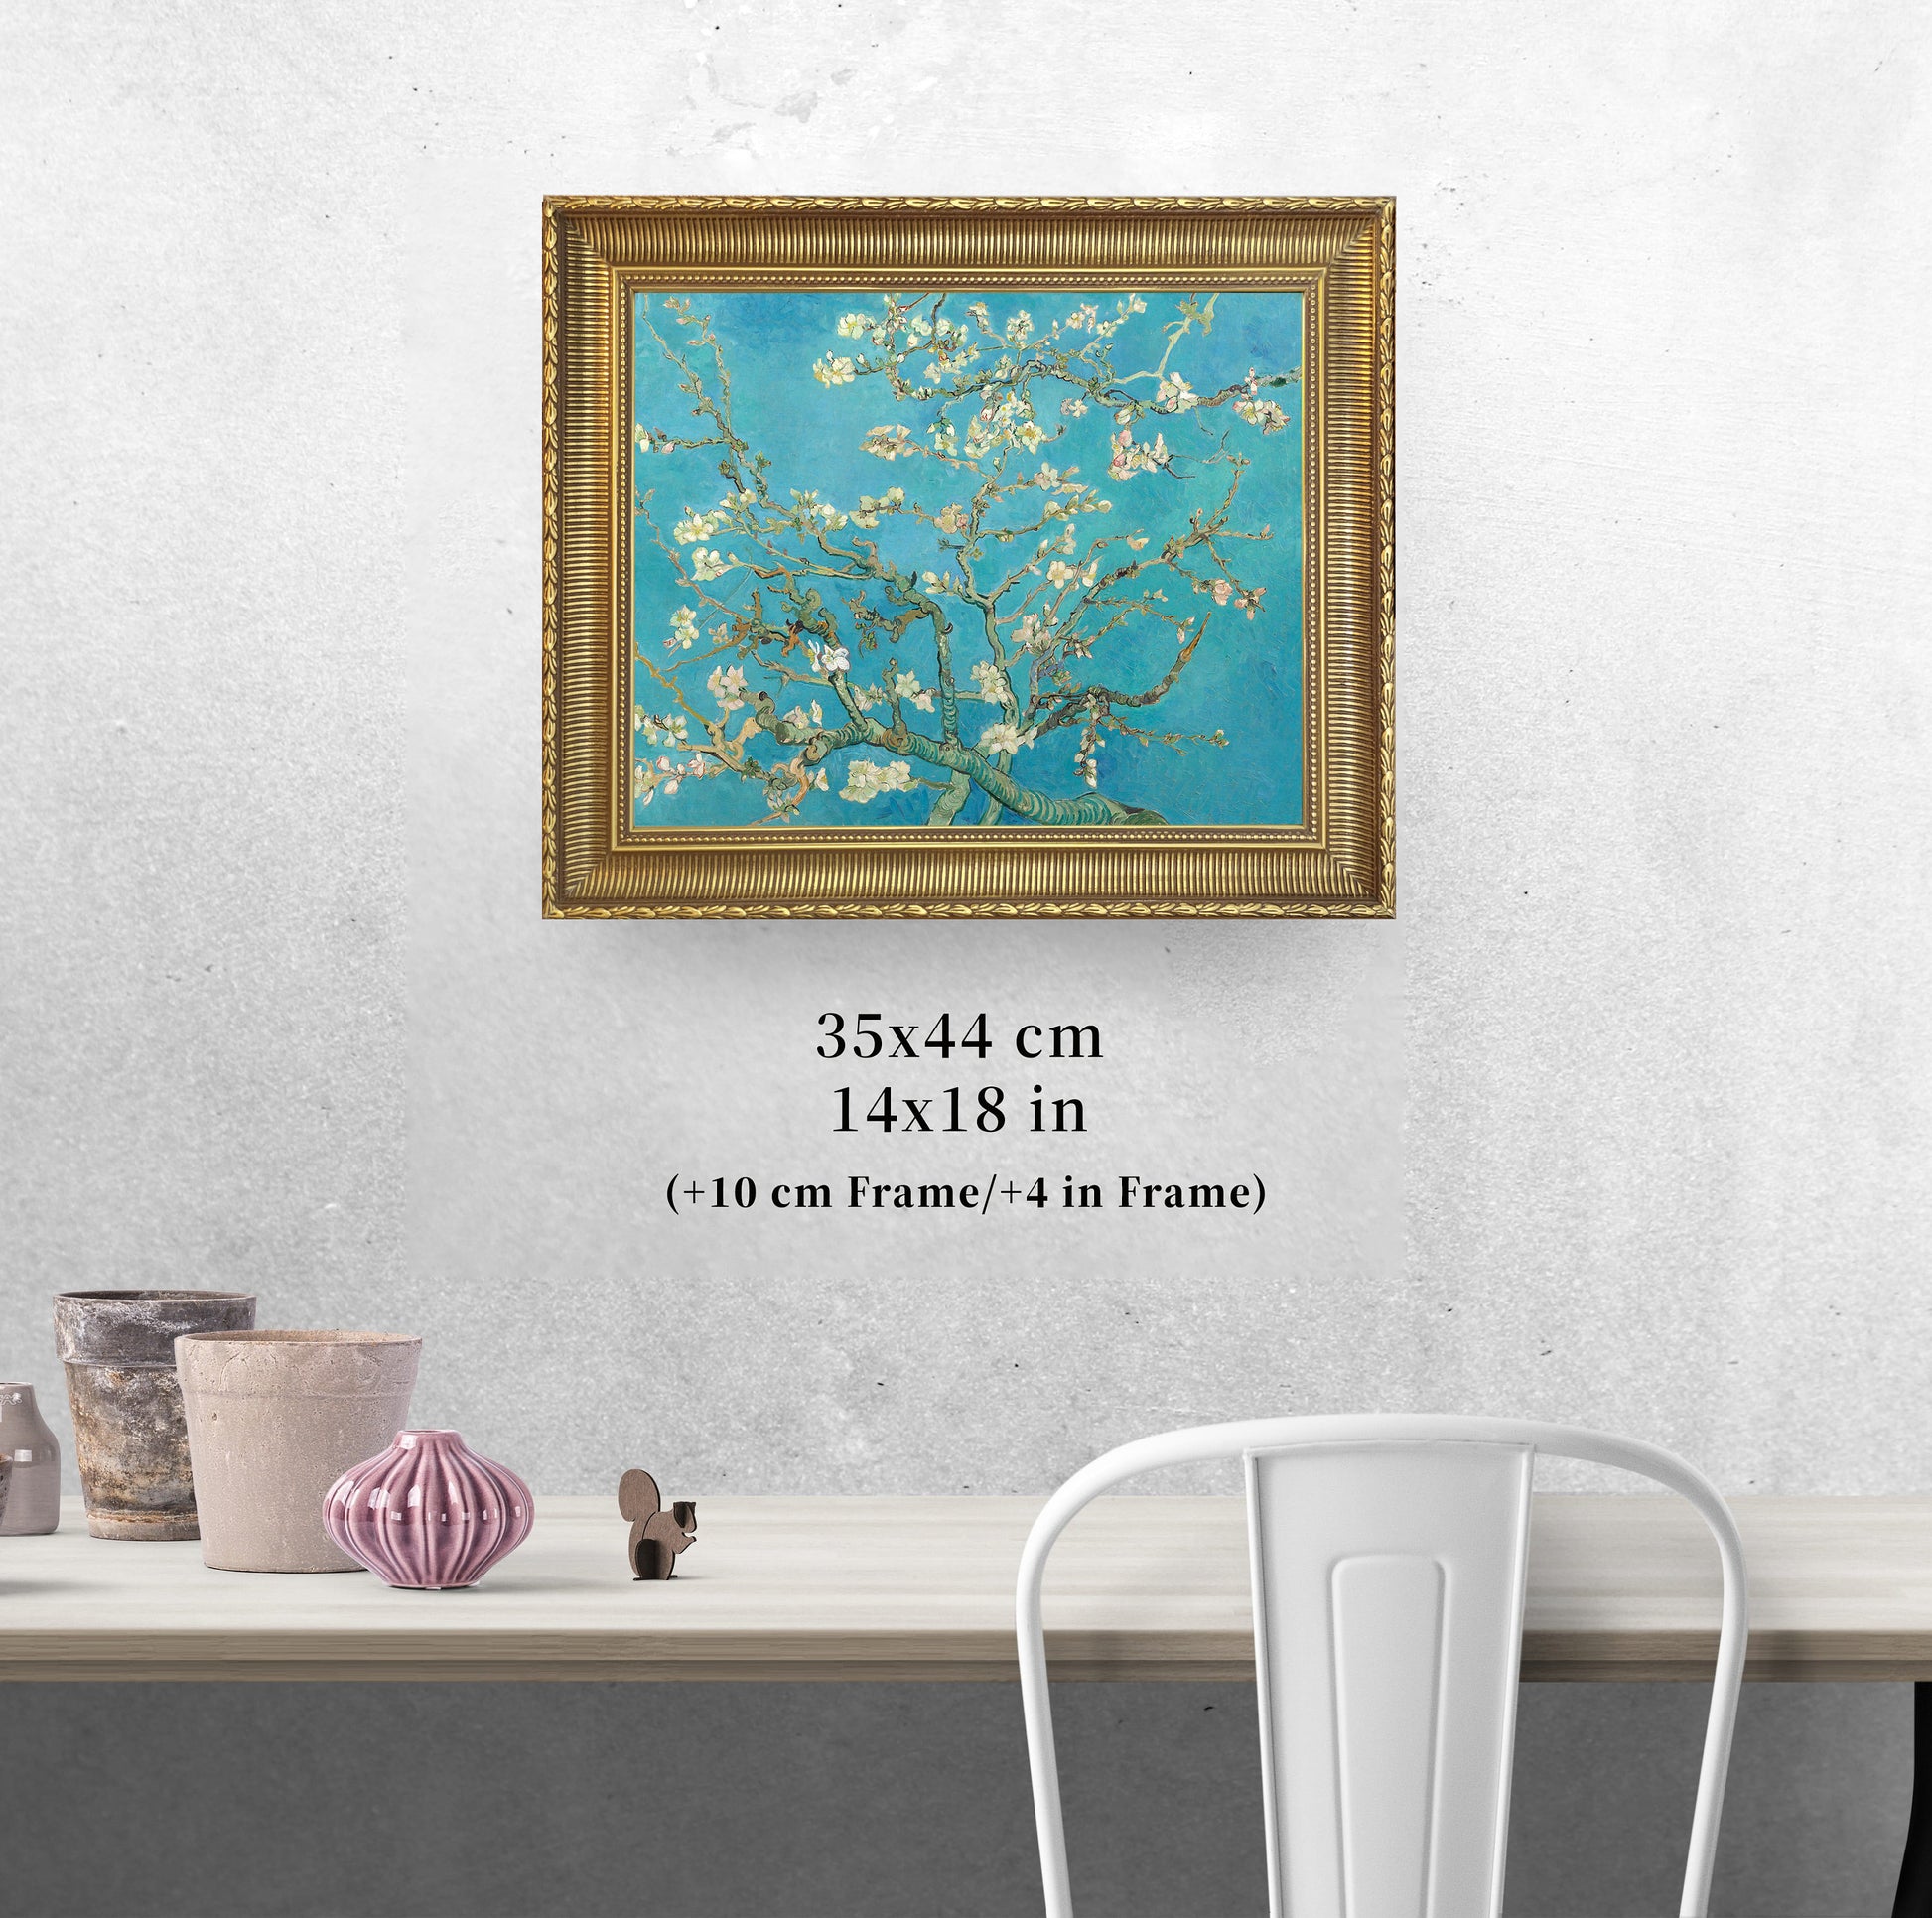 Almond Blossom by Vincent Van Gogh, 3d Printed with texture and brush strokes looks like original oil-painting, code:056